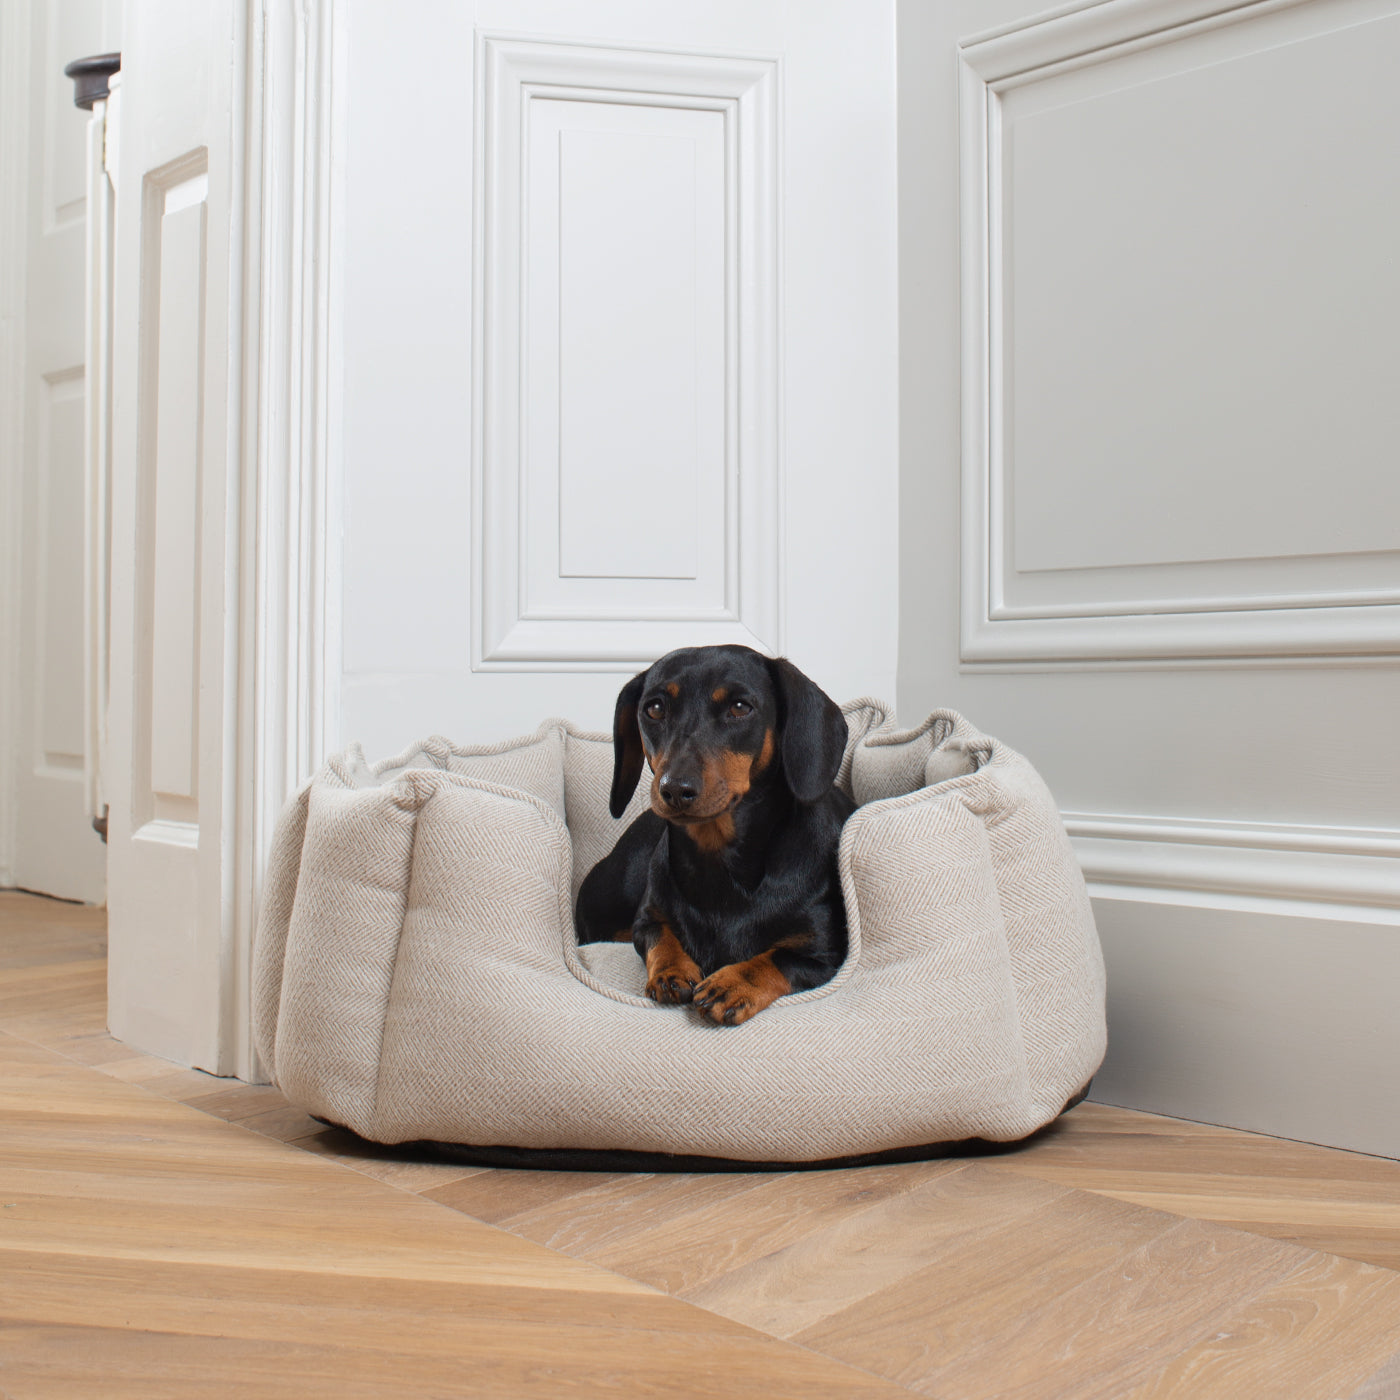 Discover Our Luxurious High Wall Bed For Dogs, Featuring inner pillow with plush teddy fleece on one side To Craft The Perfect Dogs Bed In Stunning Natural Herringbone Tweed! Available To Personalize Now at Lords & Labradors US